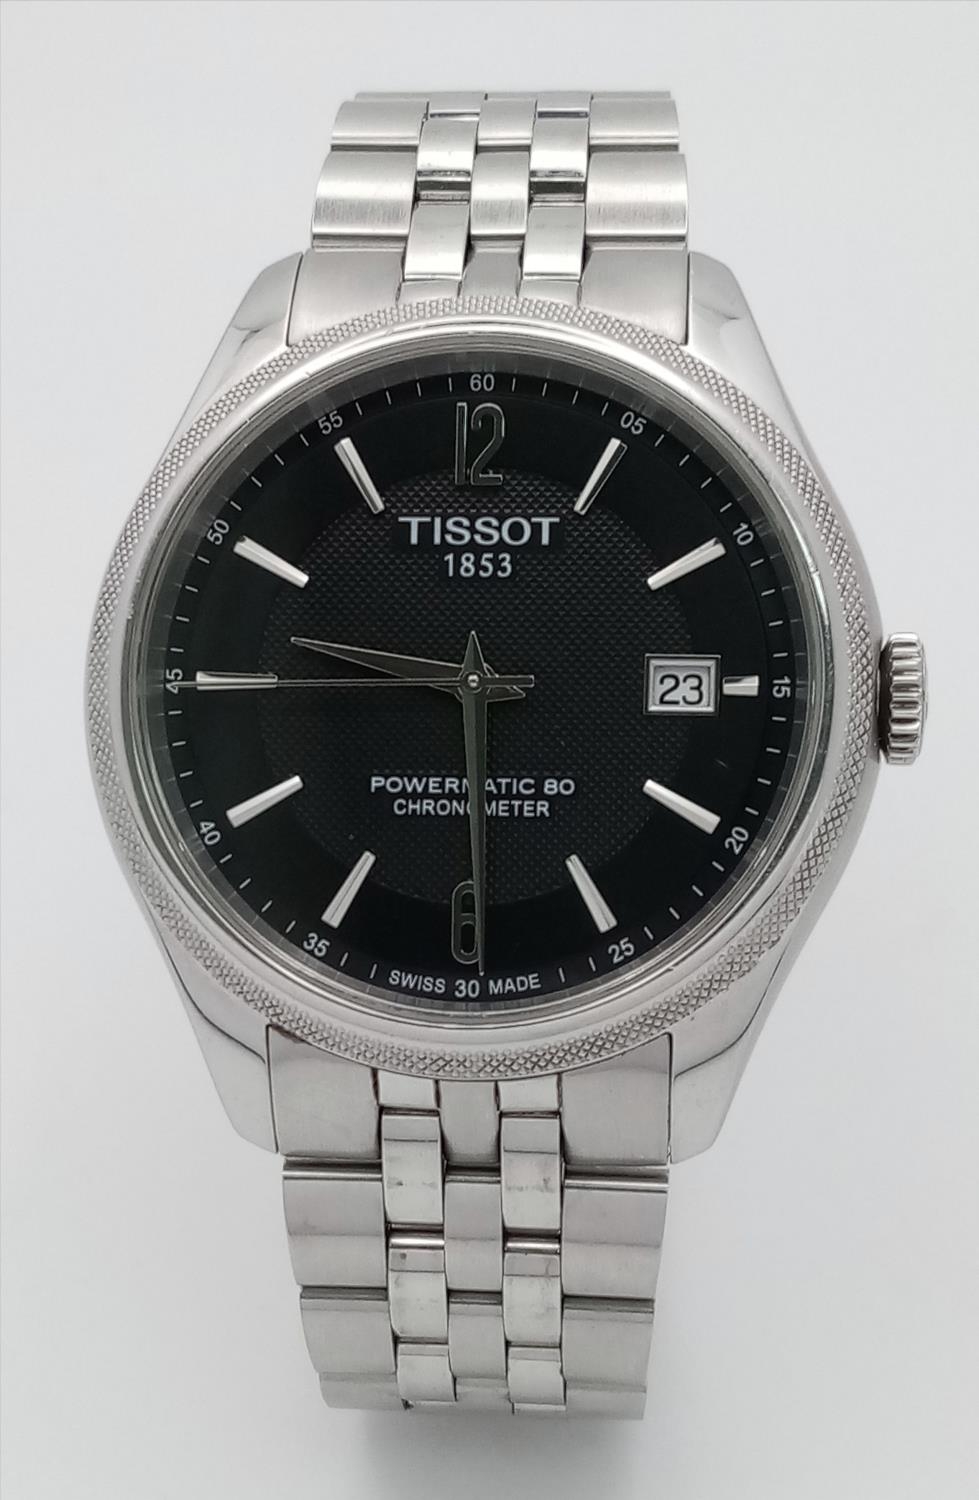 A Tissot Powermatic 80 Gents Watch. Stainless steel bracelet and case - 41mm. Black dial with date